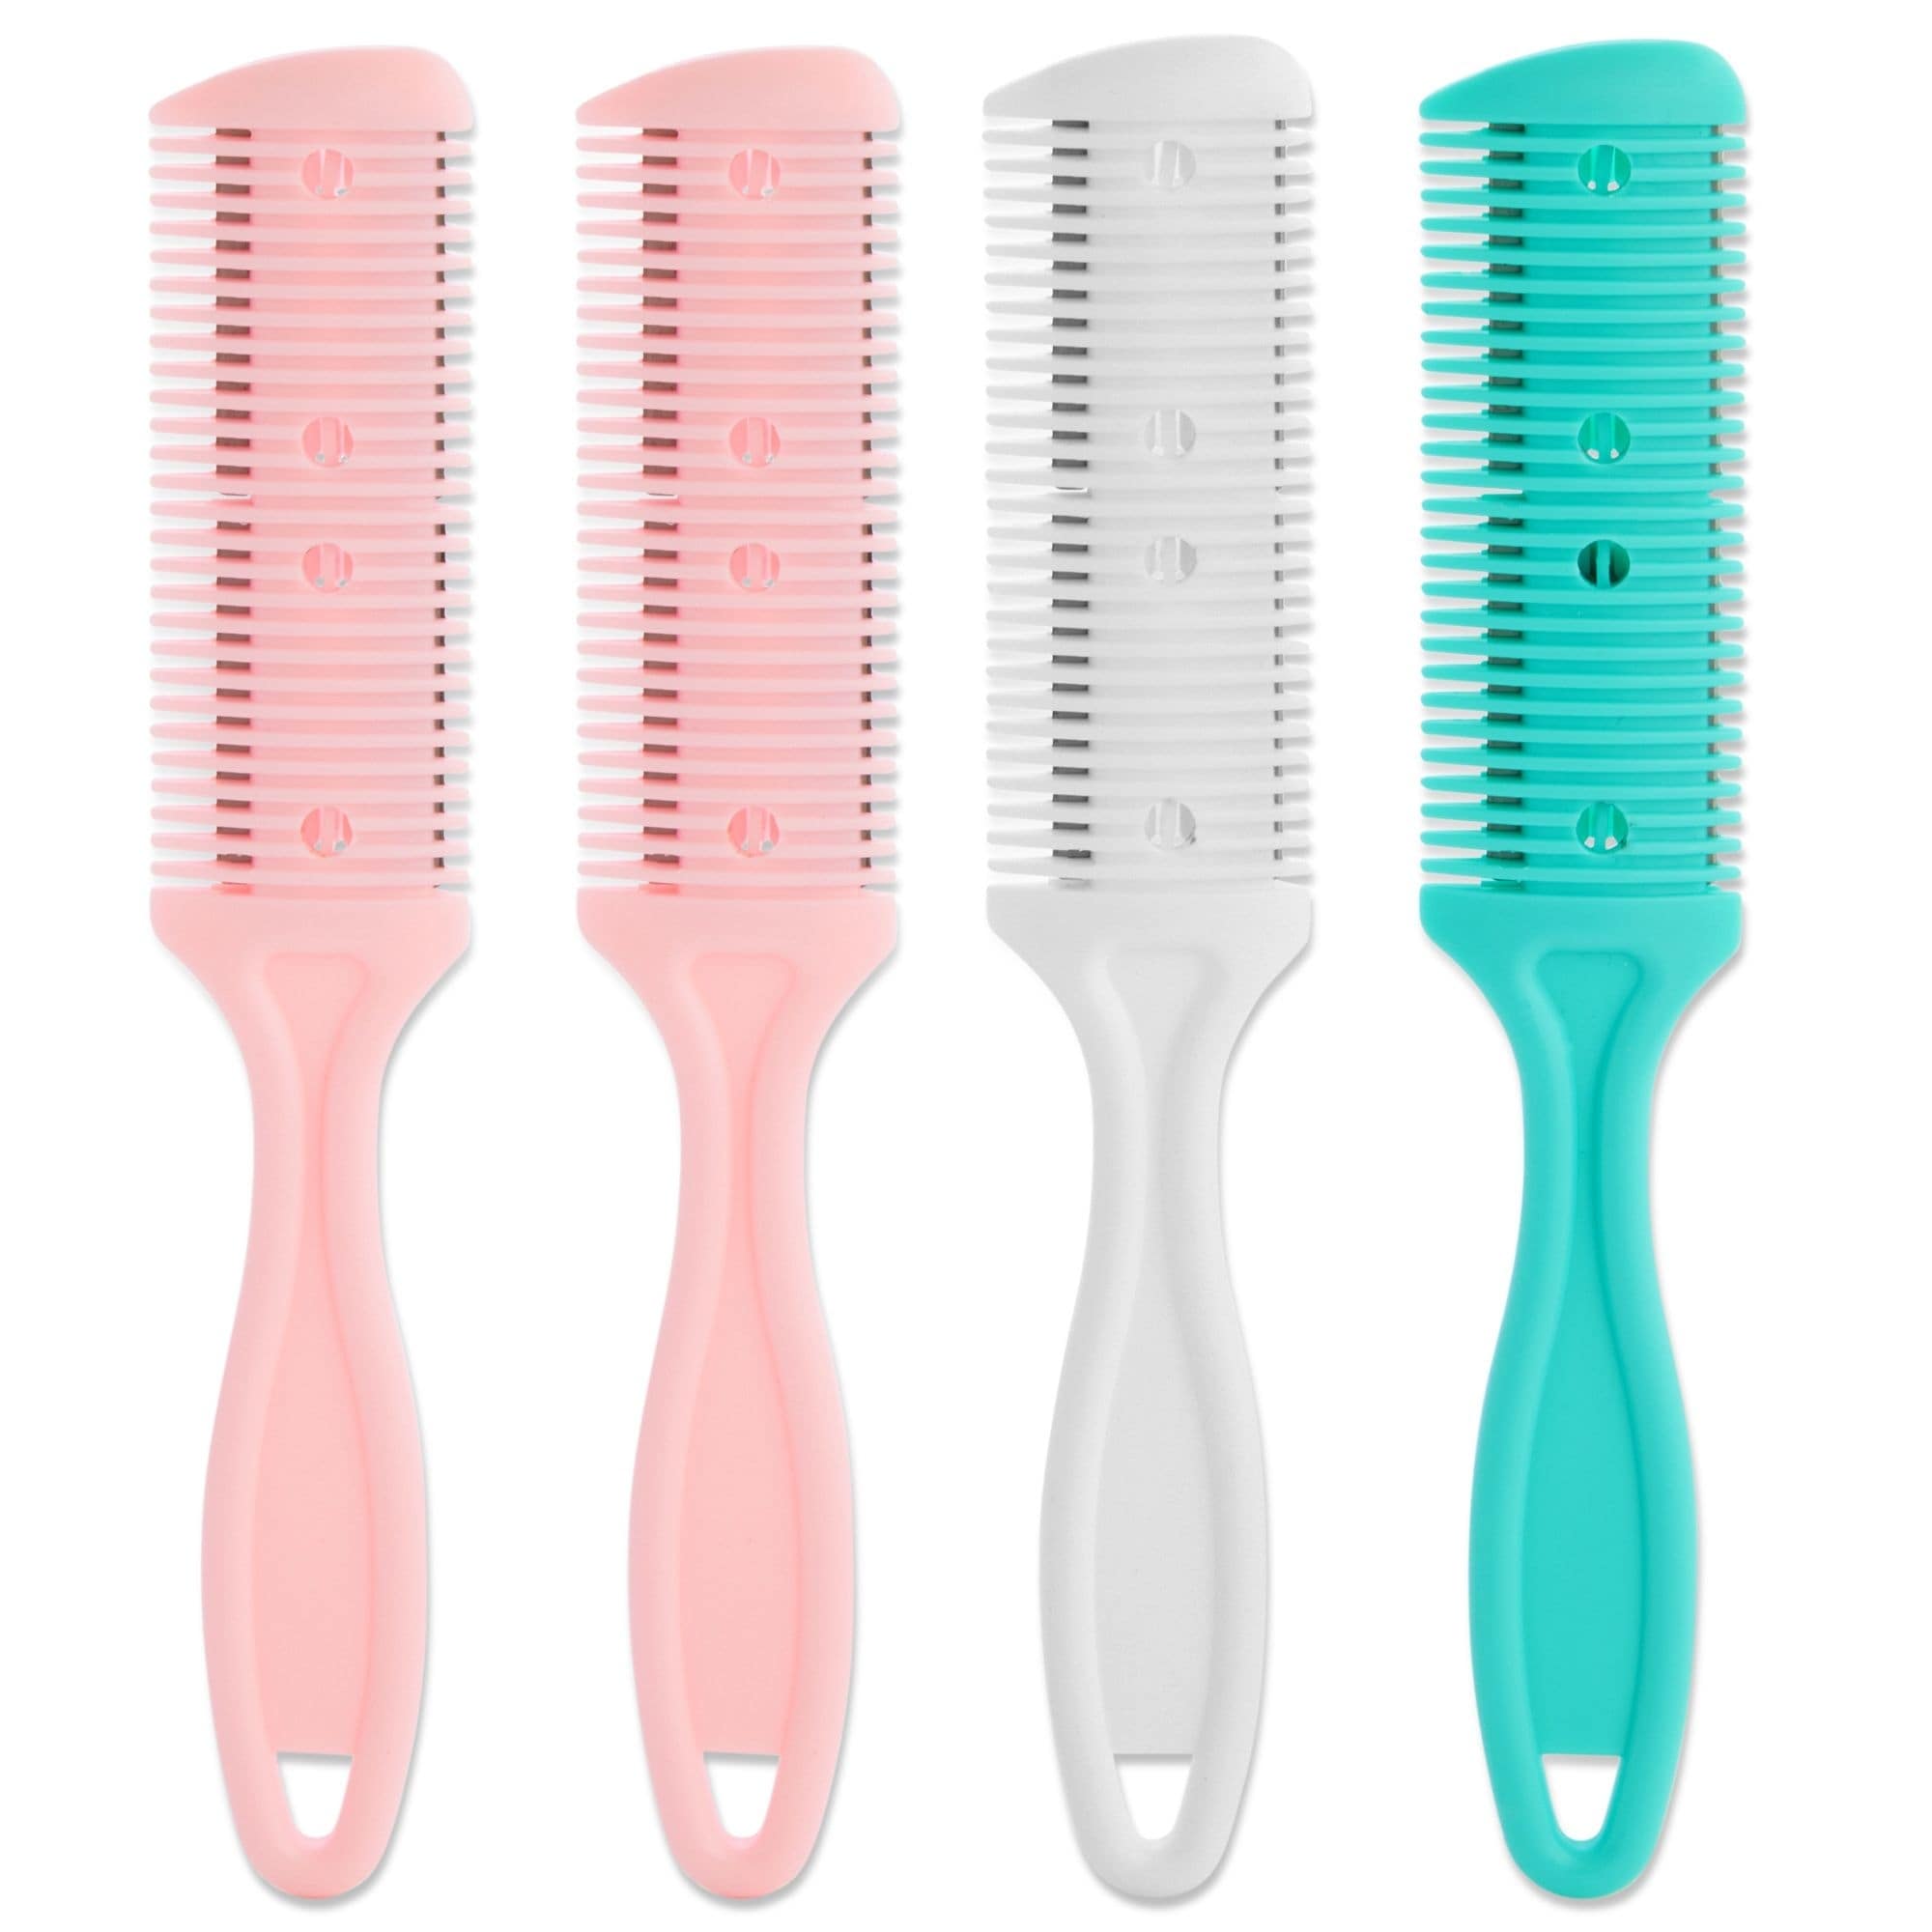 4 Pack Hair Thinning Comb Set, Razor Combs for Wom...